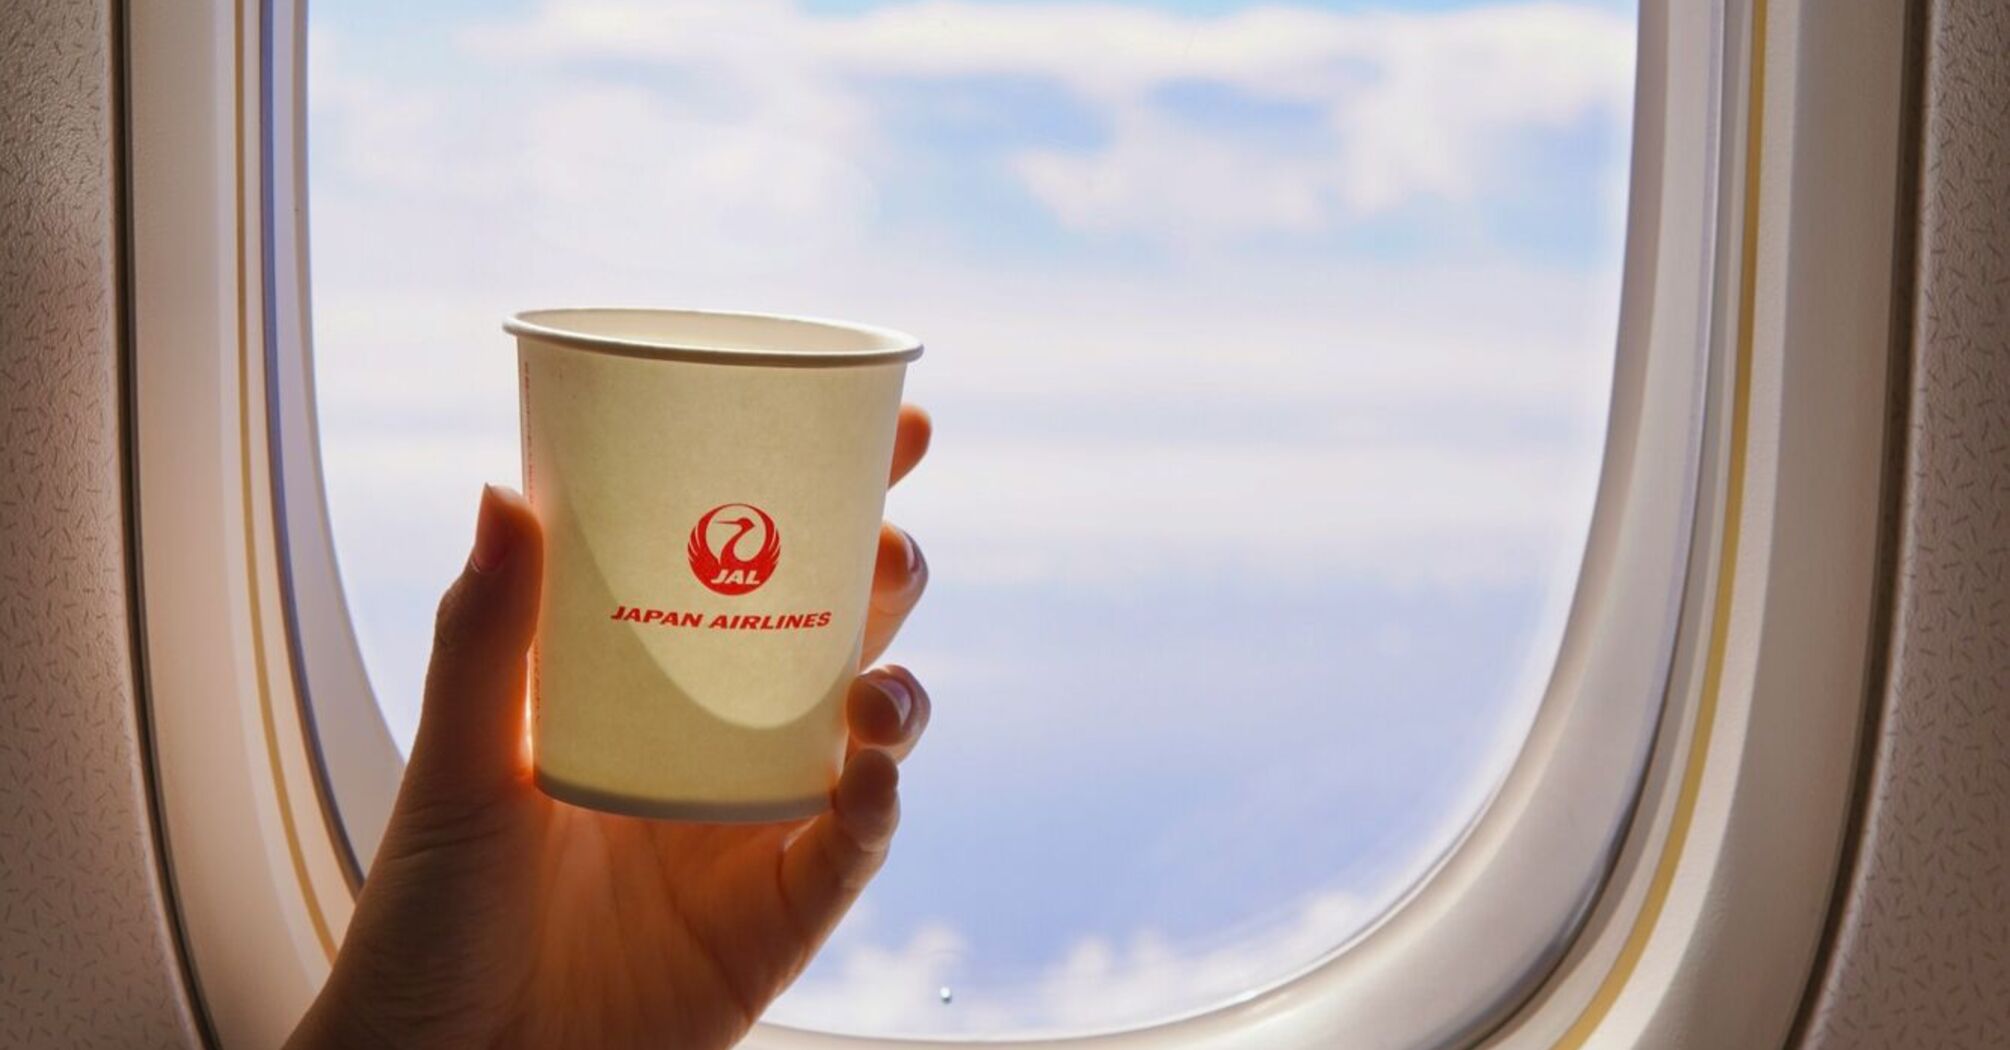 A person holding a Japan Airlines (JAL) cup near an airplane window, with a view of the sky and clouds outside